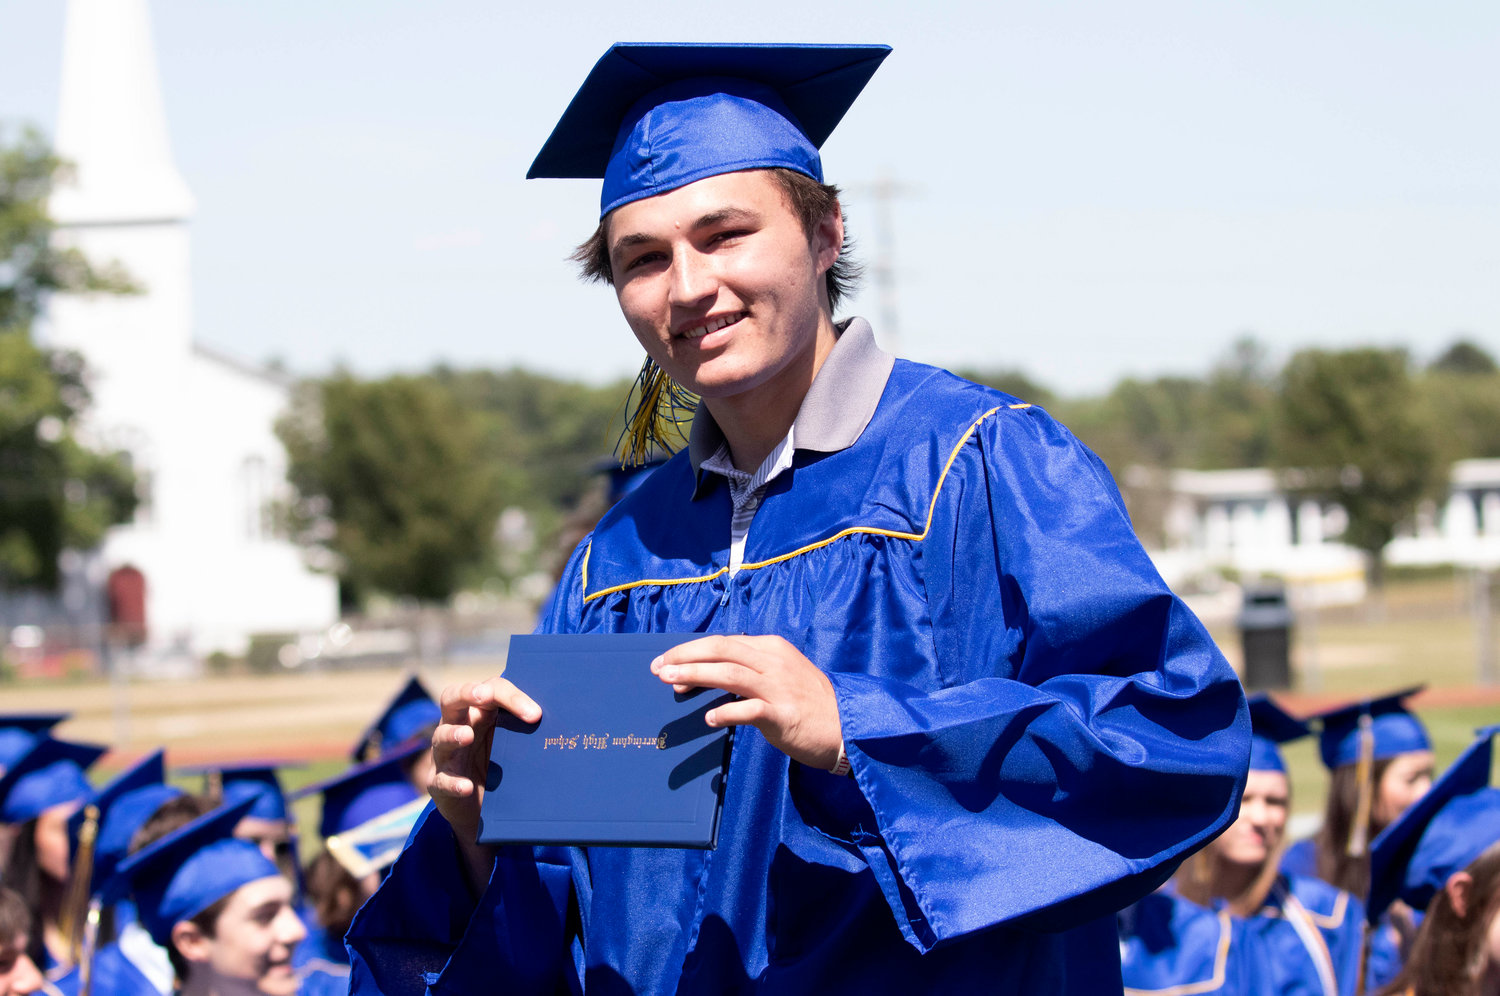 James Anderson shows off his diploma during the graduation ceremony at Victory Field on Sunday, June 5.